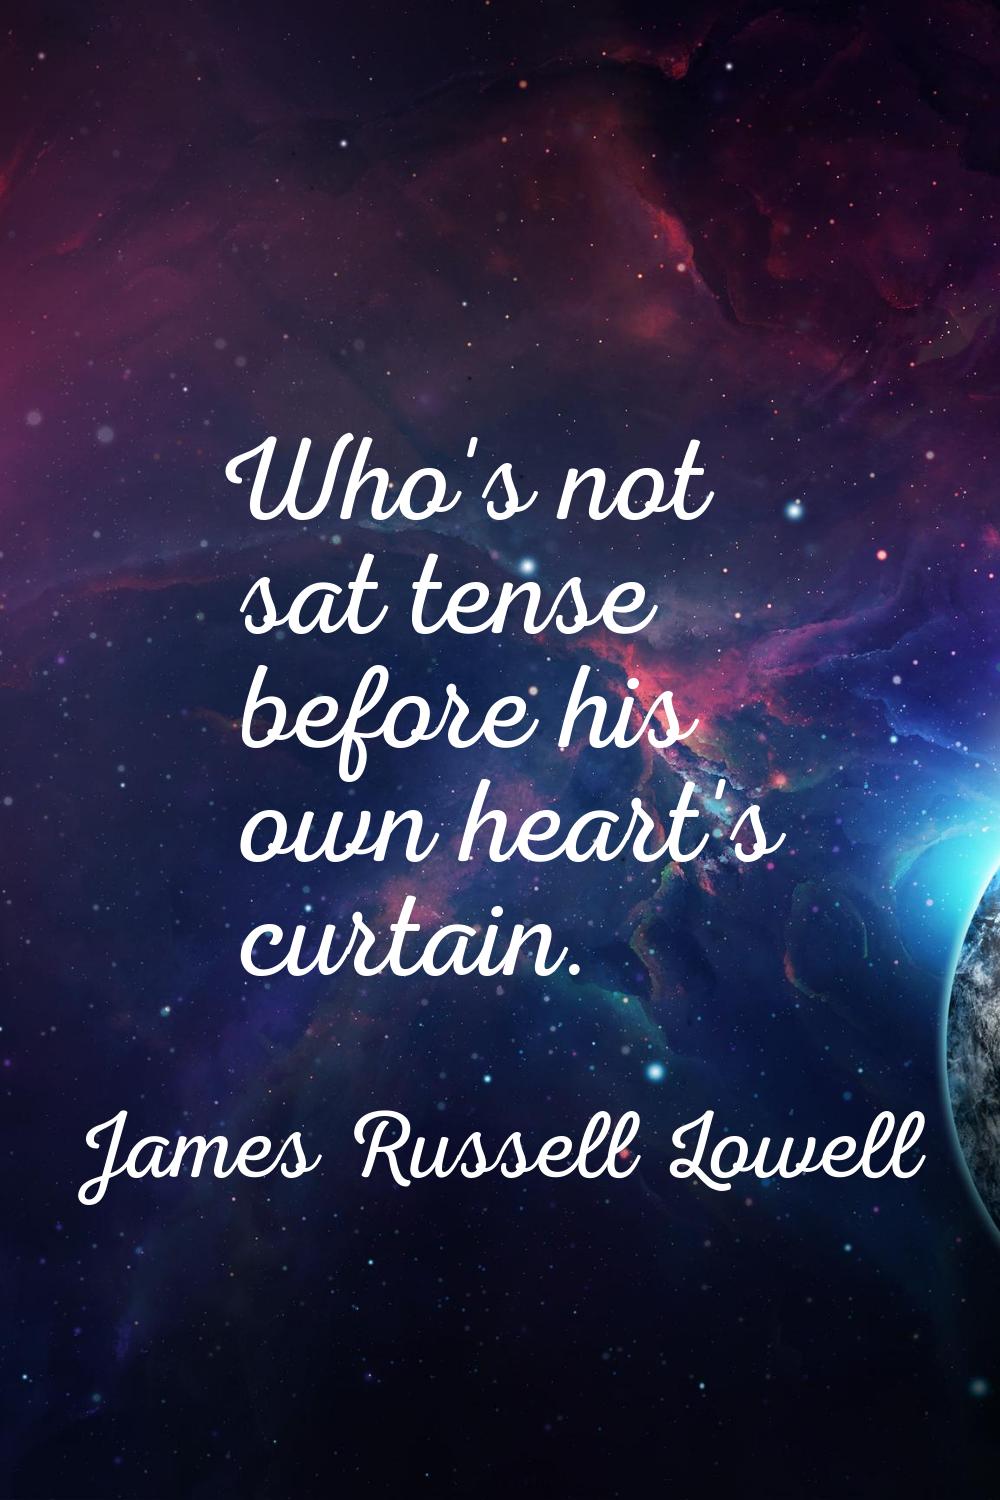 Who's not sat tense before his own heart's curtain.